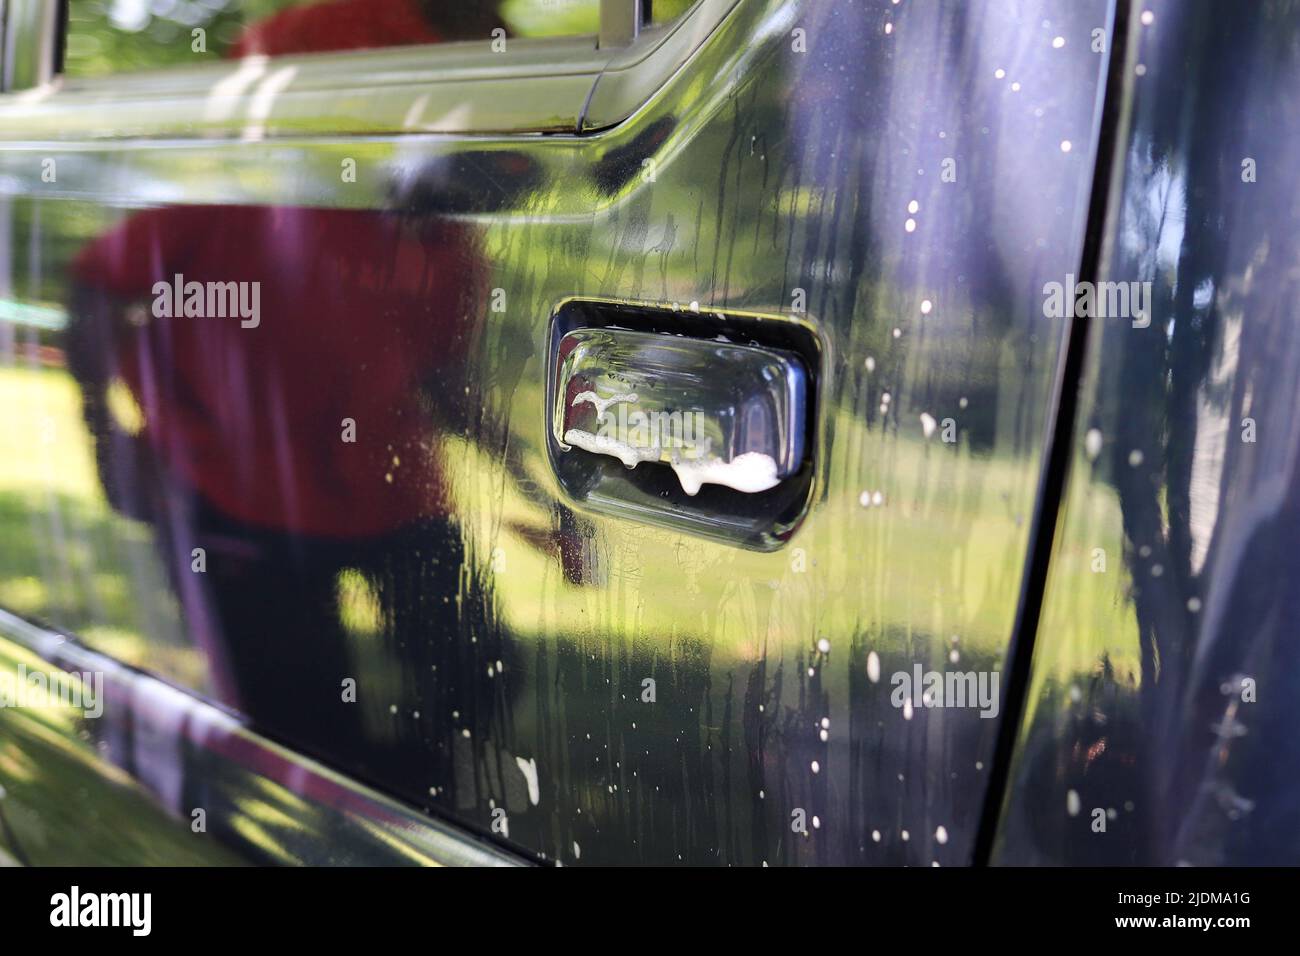 Soap suds on a freshly clean vehicle Stock Photo